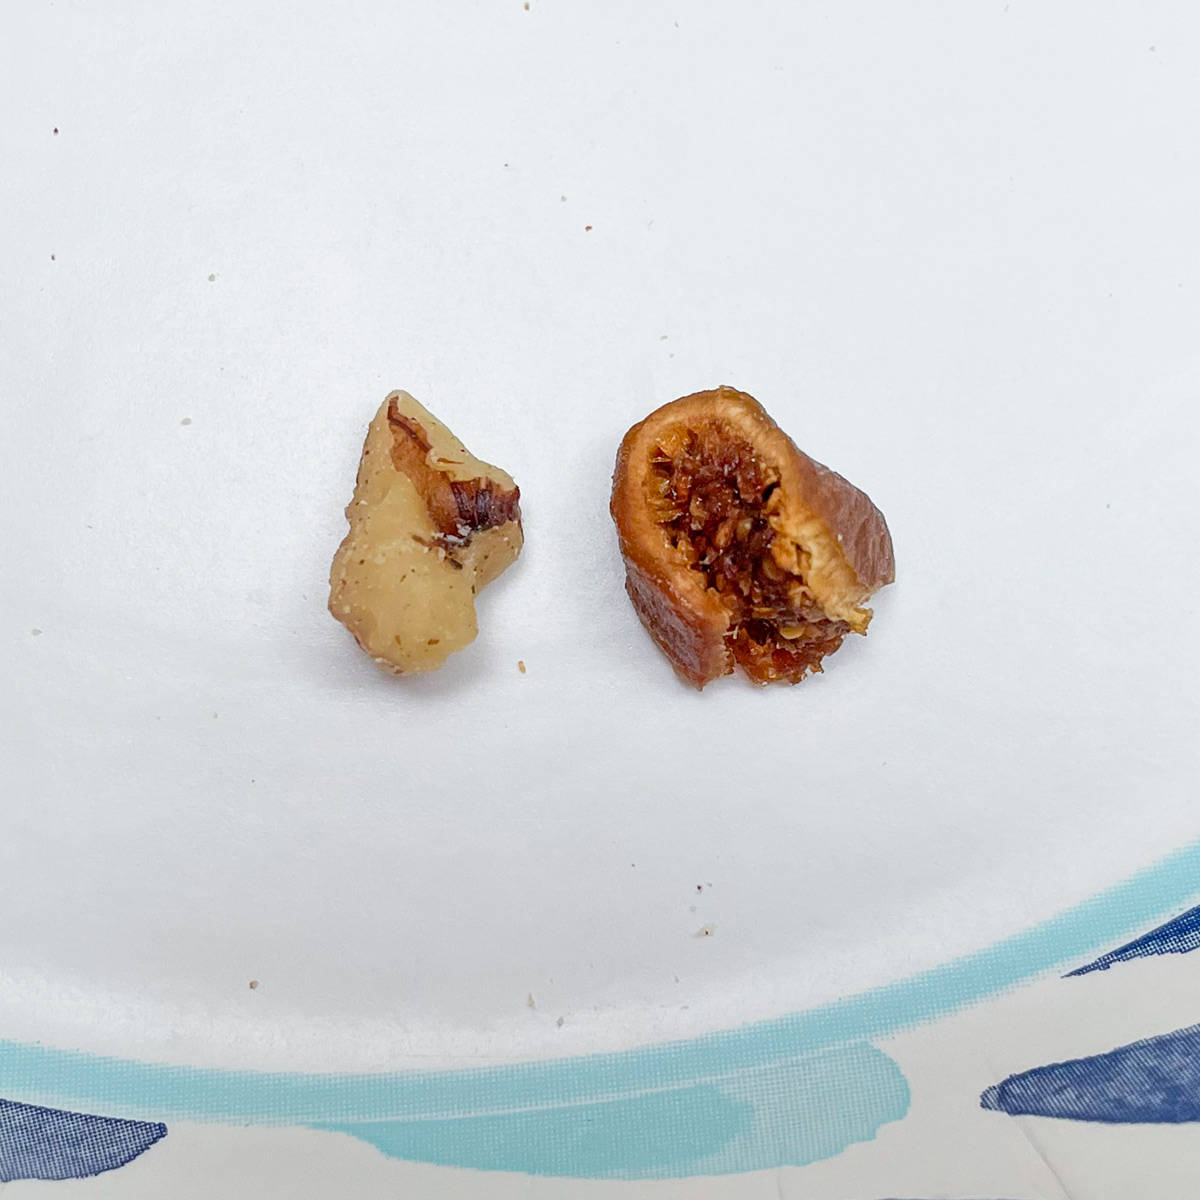 Showing the size of the chopped walnuts and the chopped figs. You want about the same size for both.